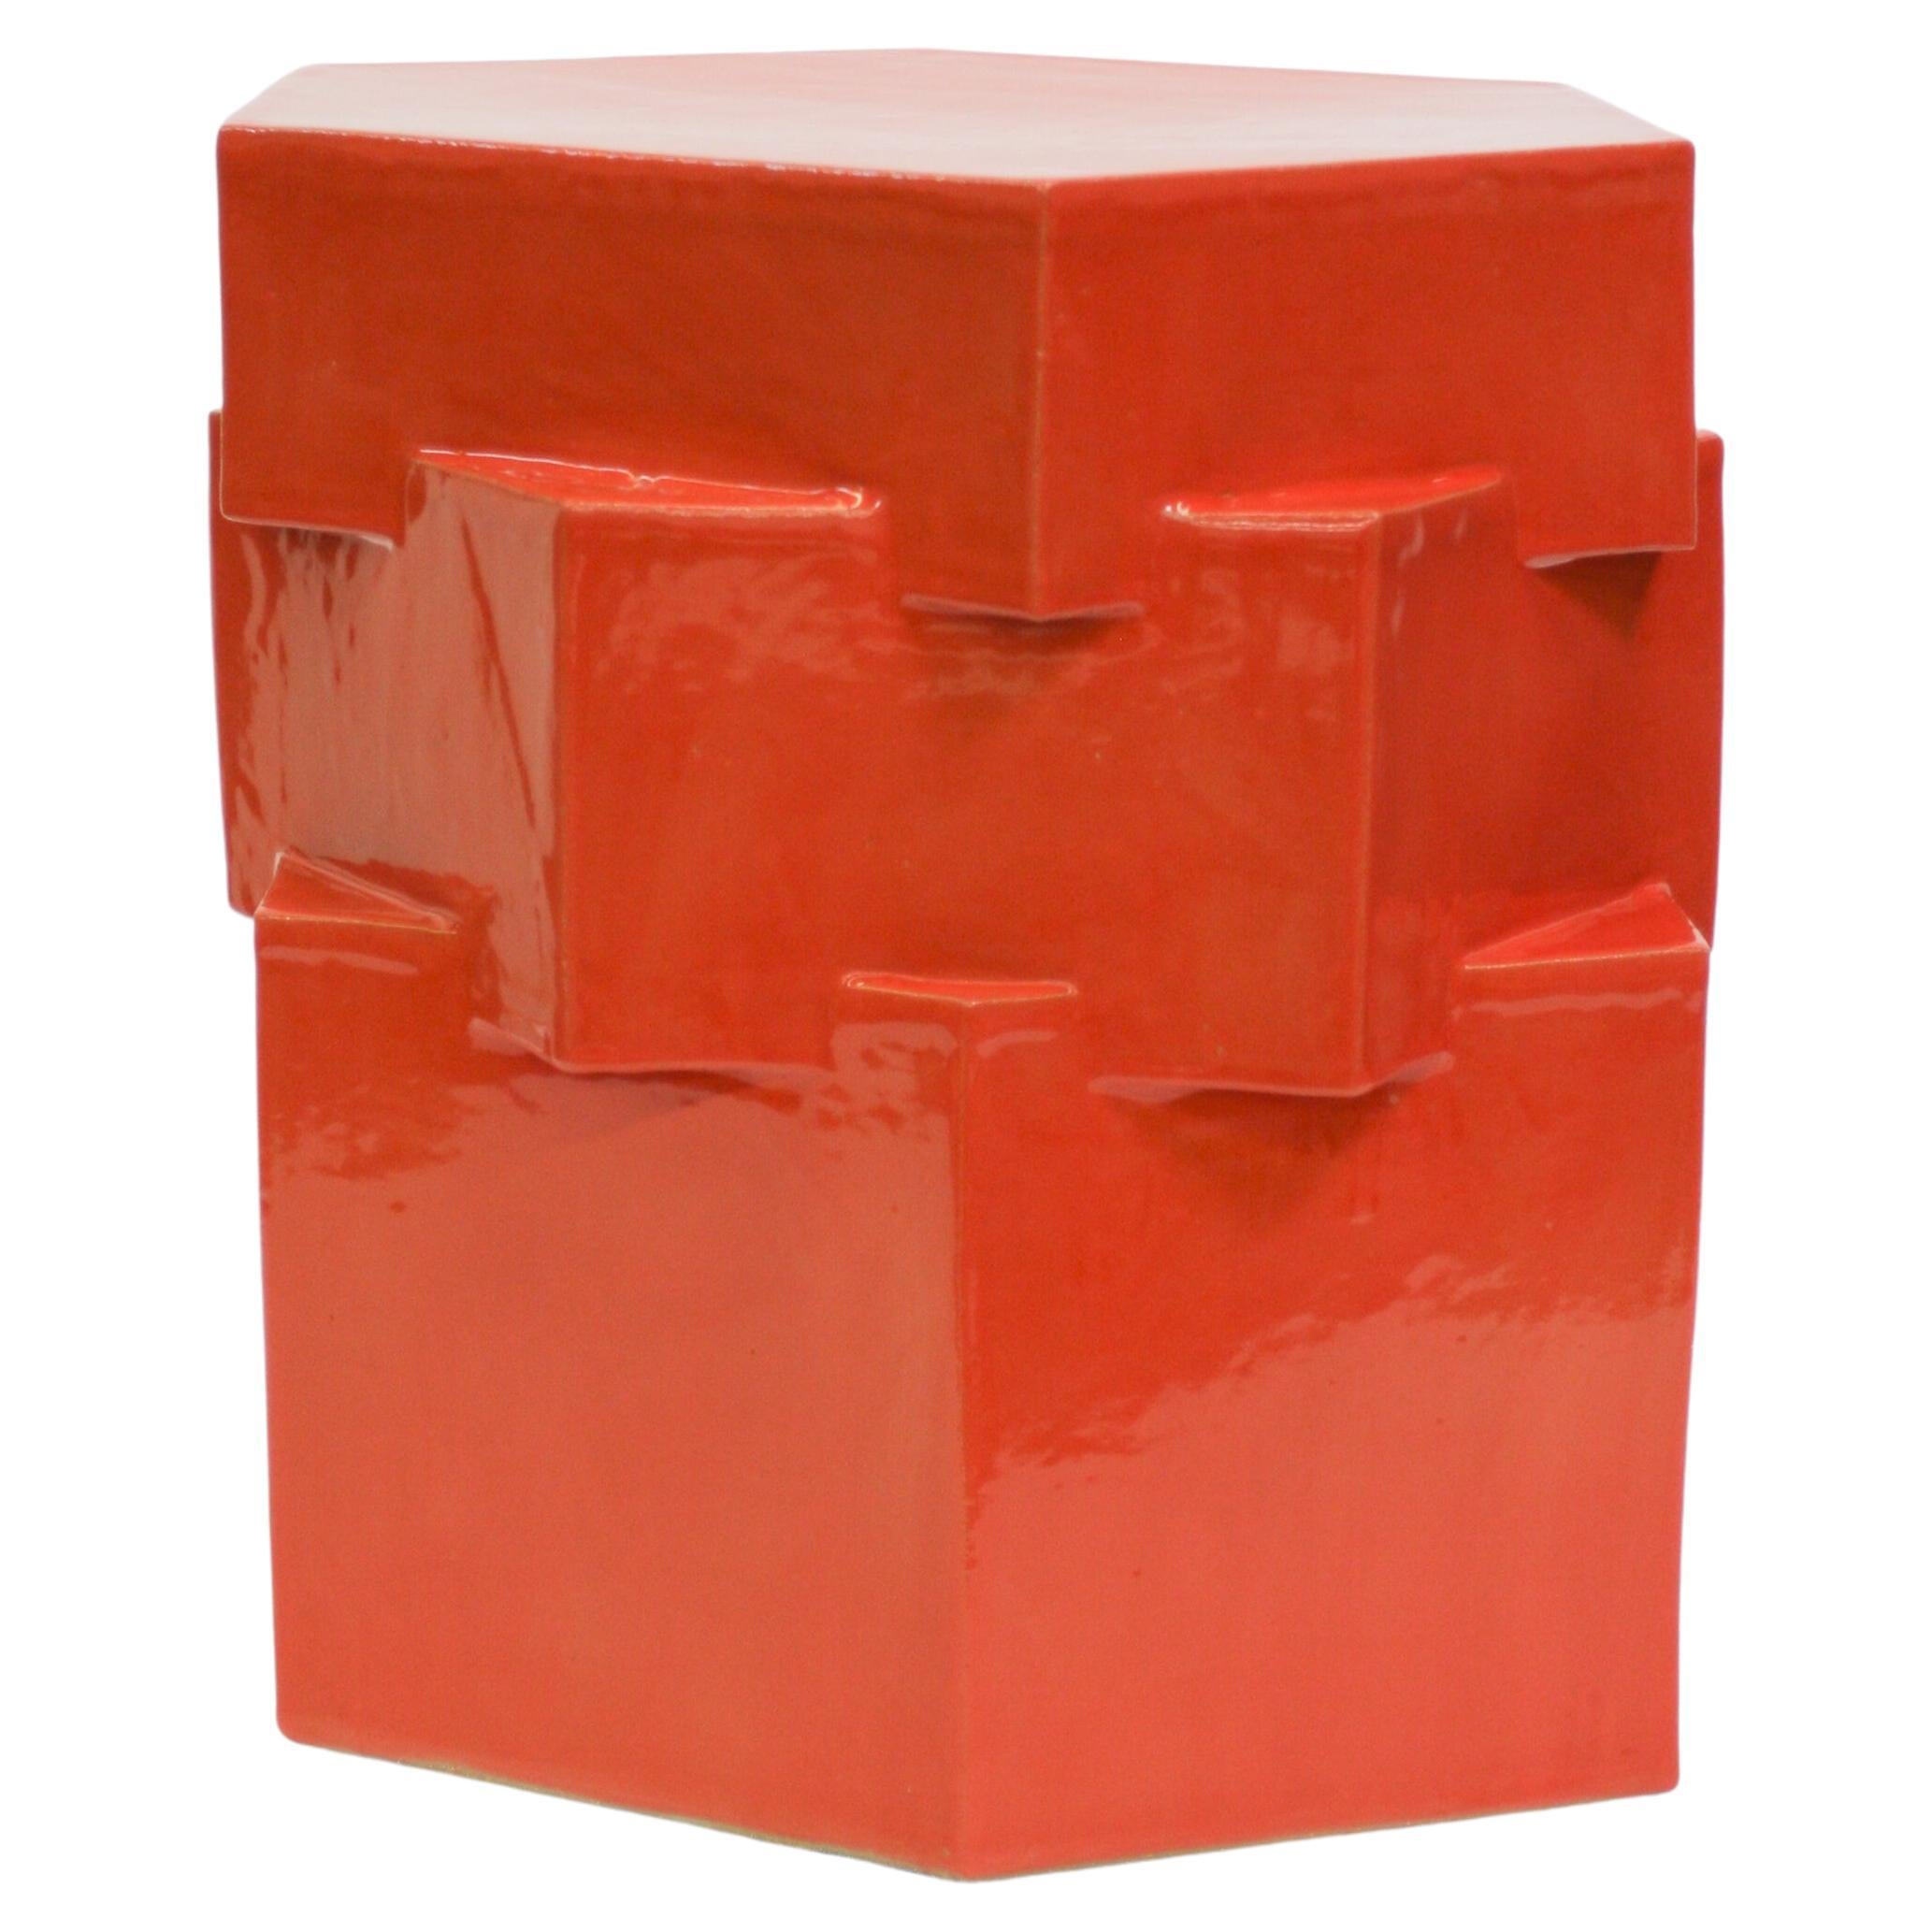 Triple Tier Ceramic Hex Side Table in Gloss Red by BZIPPY For Sale